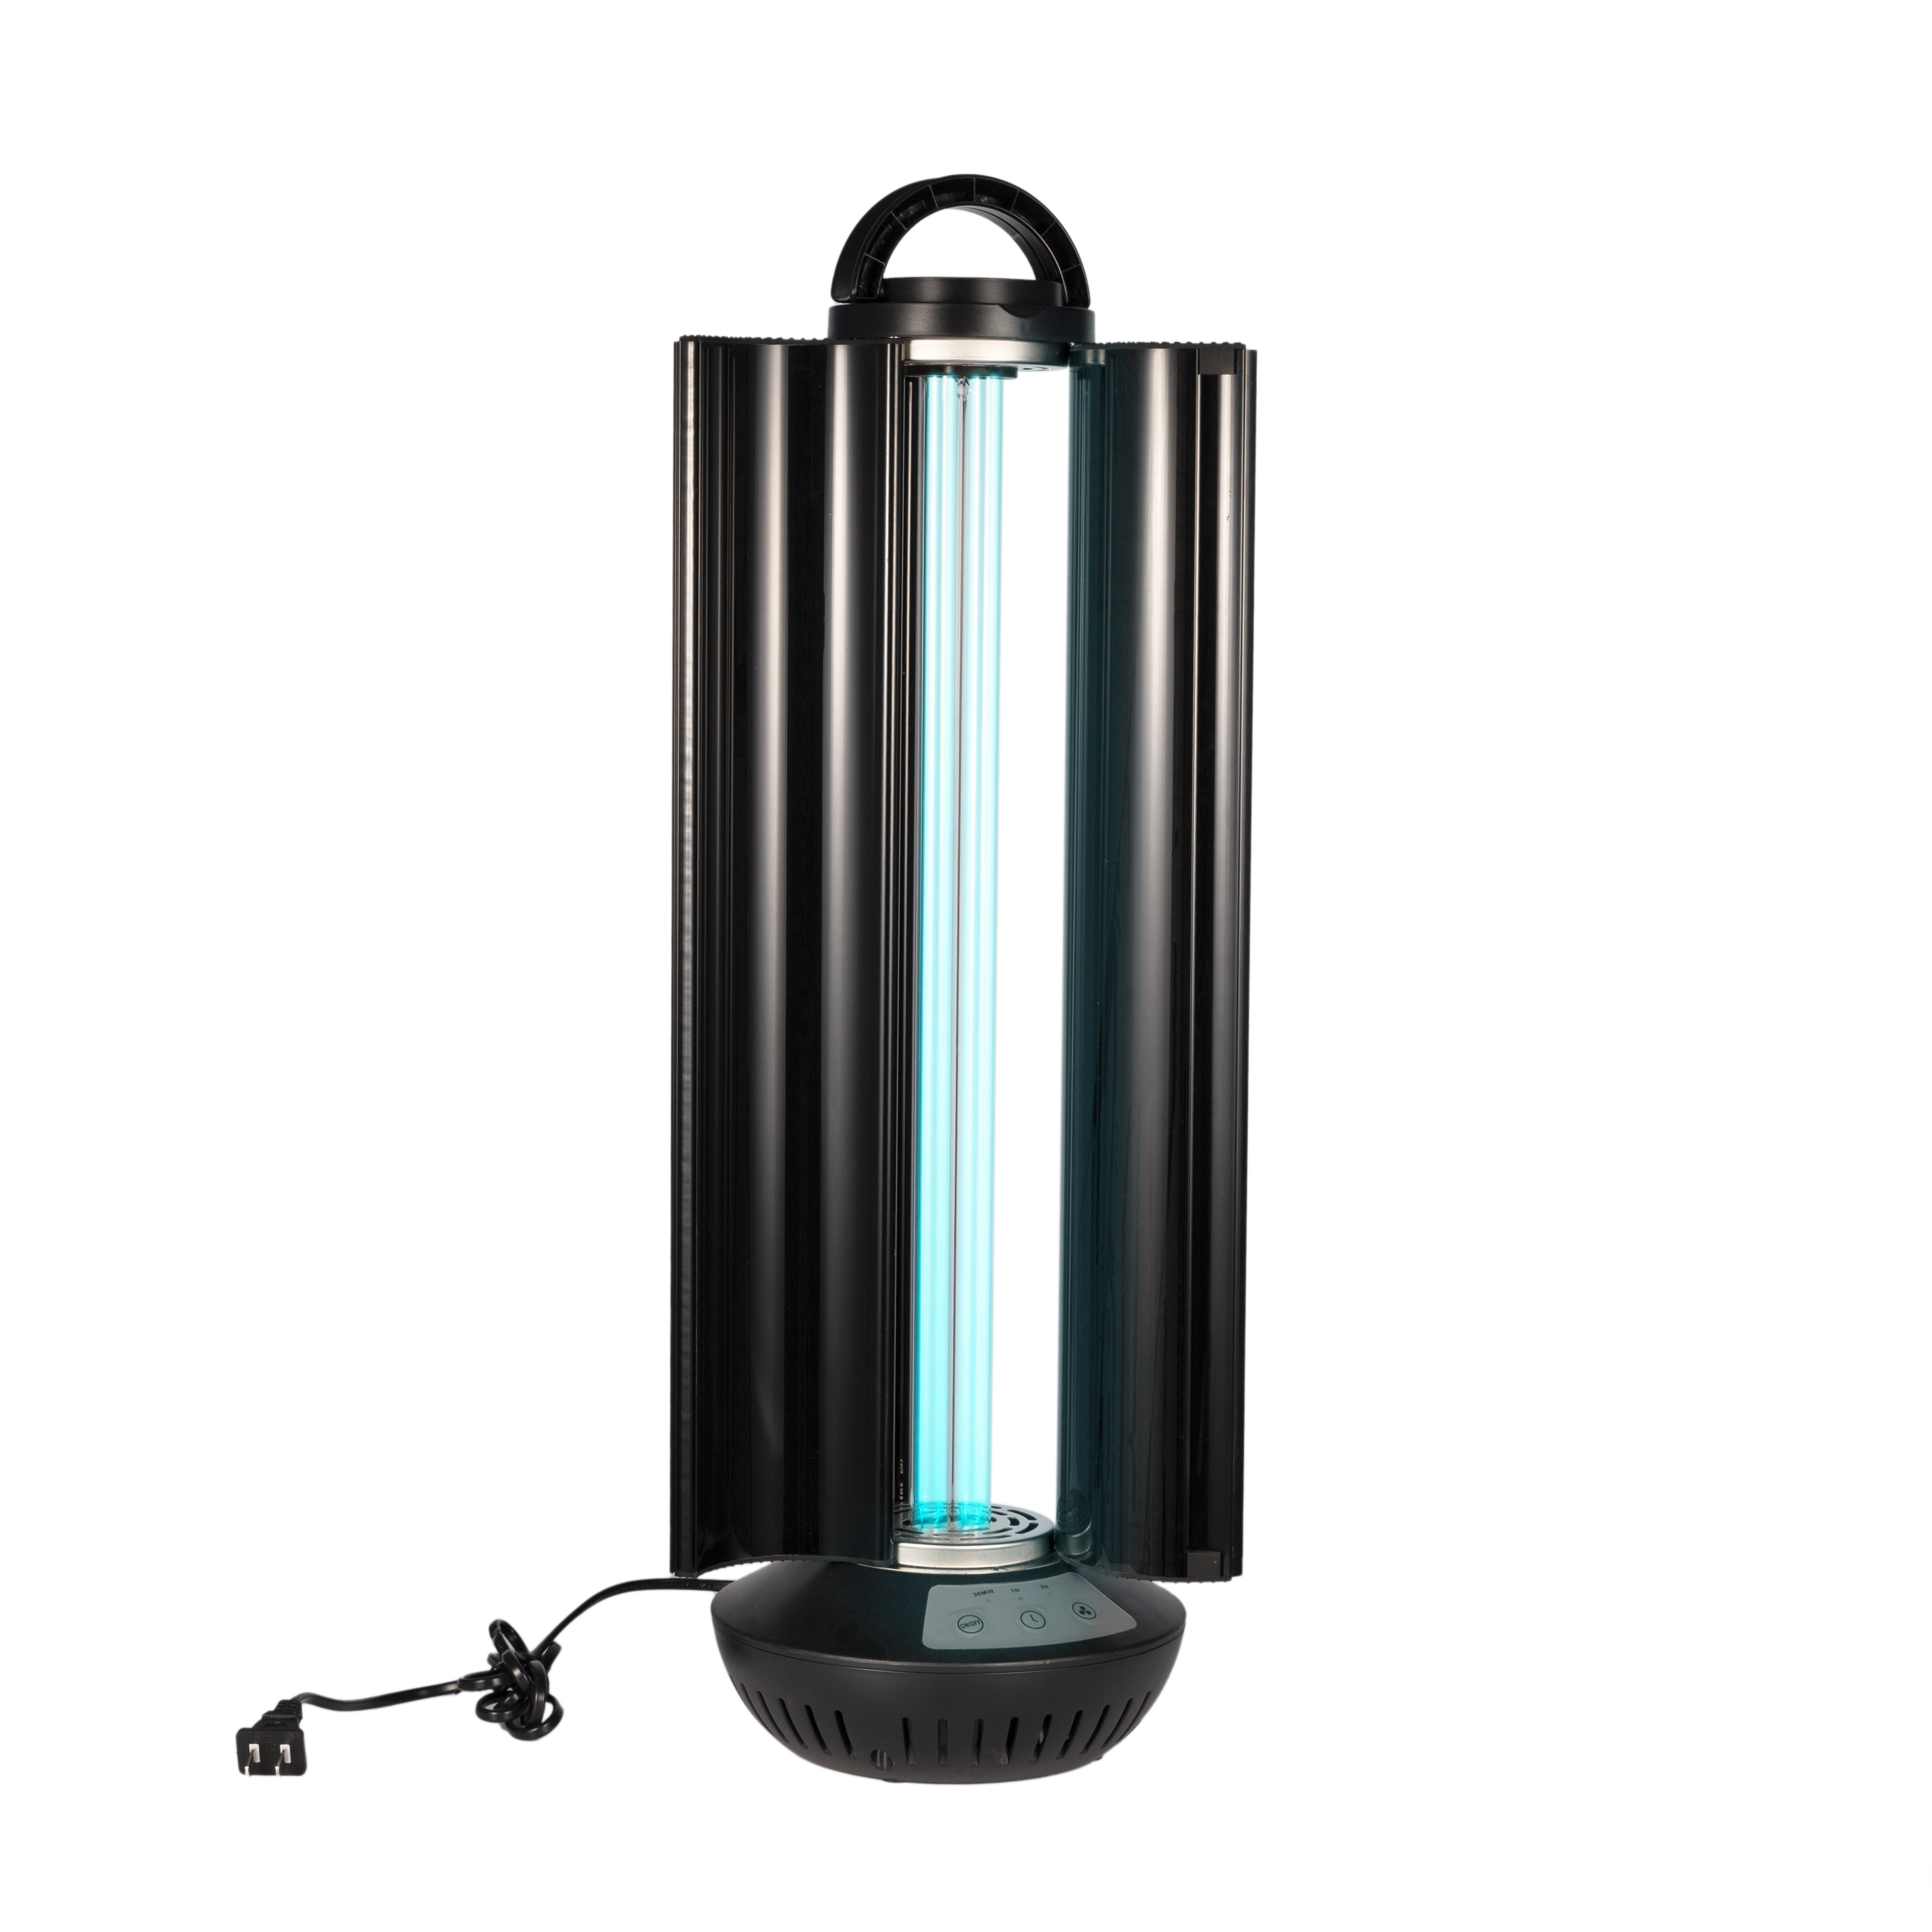 Buy cheap 80w UV Disinfection Sterilizer Lamp High Power Germicidal Machine from wholesalers